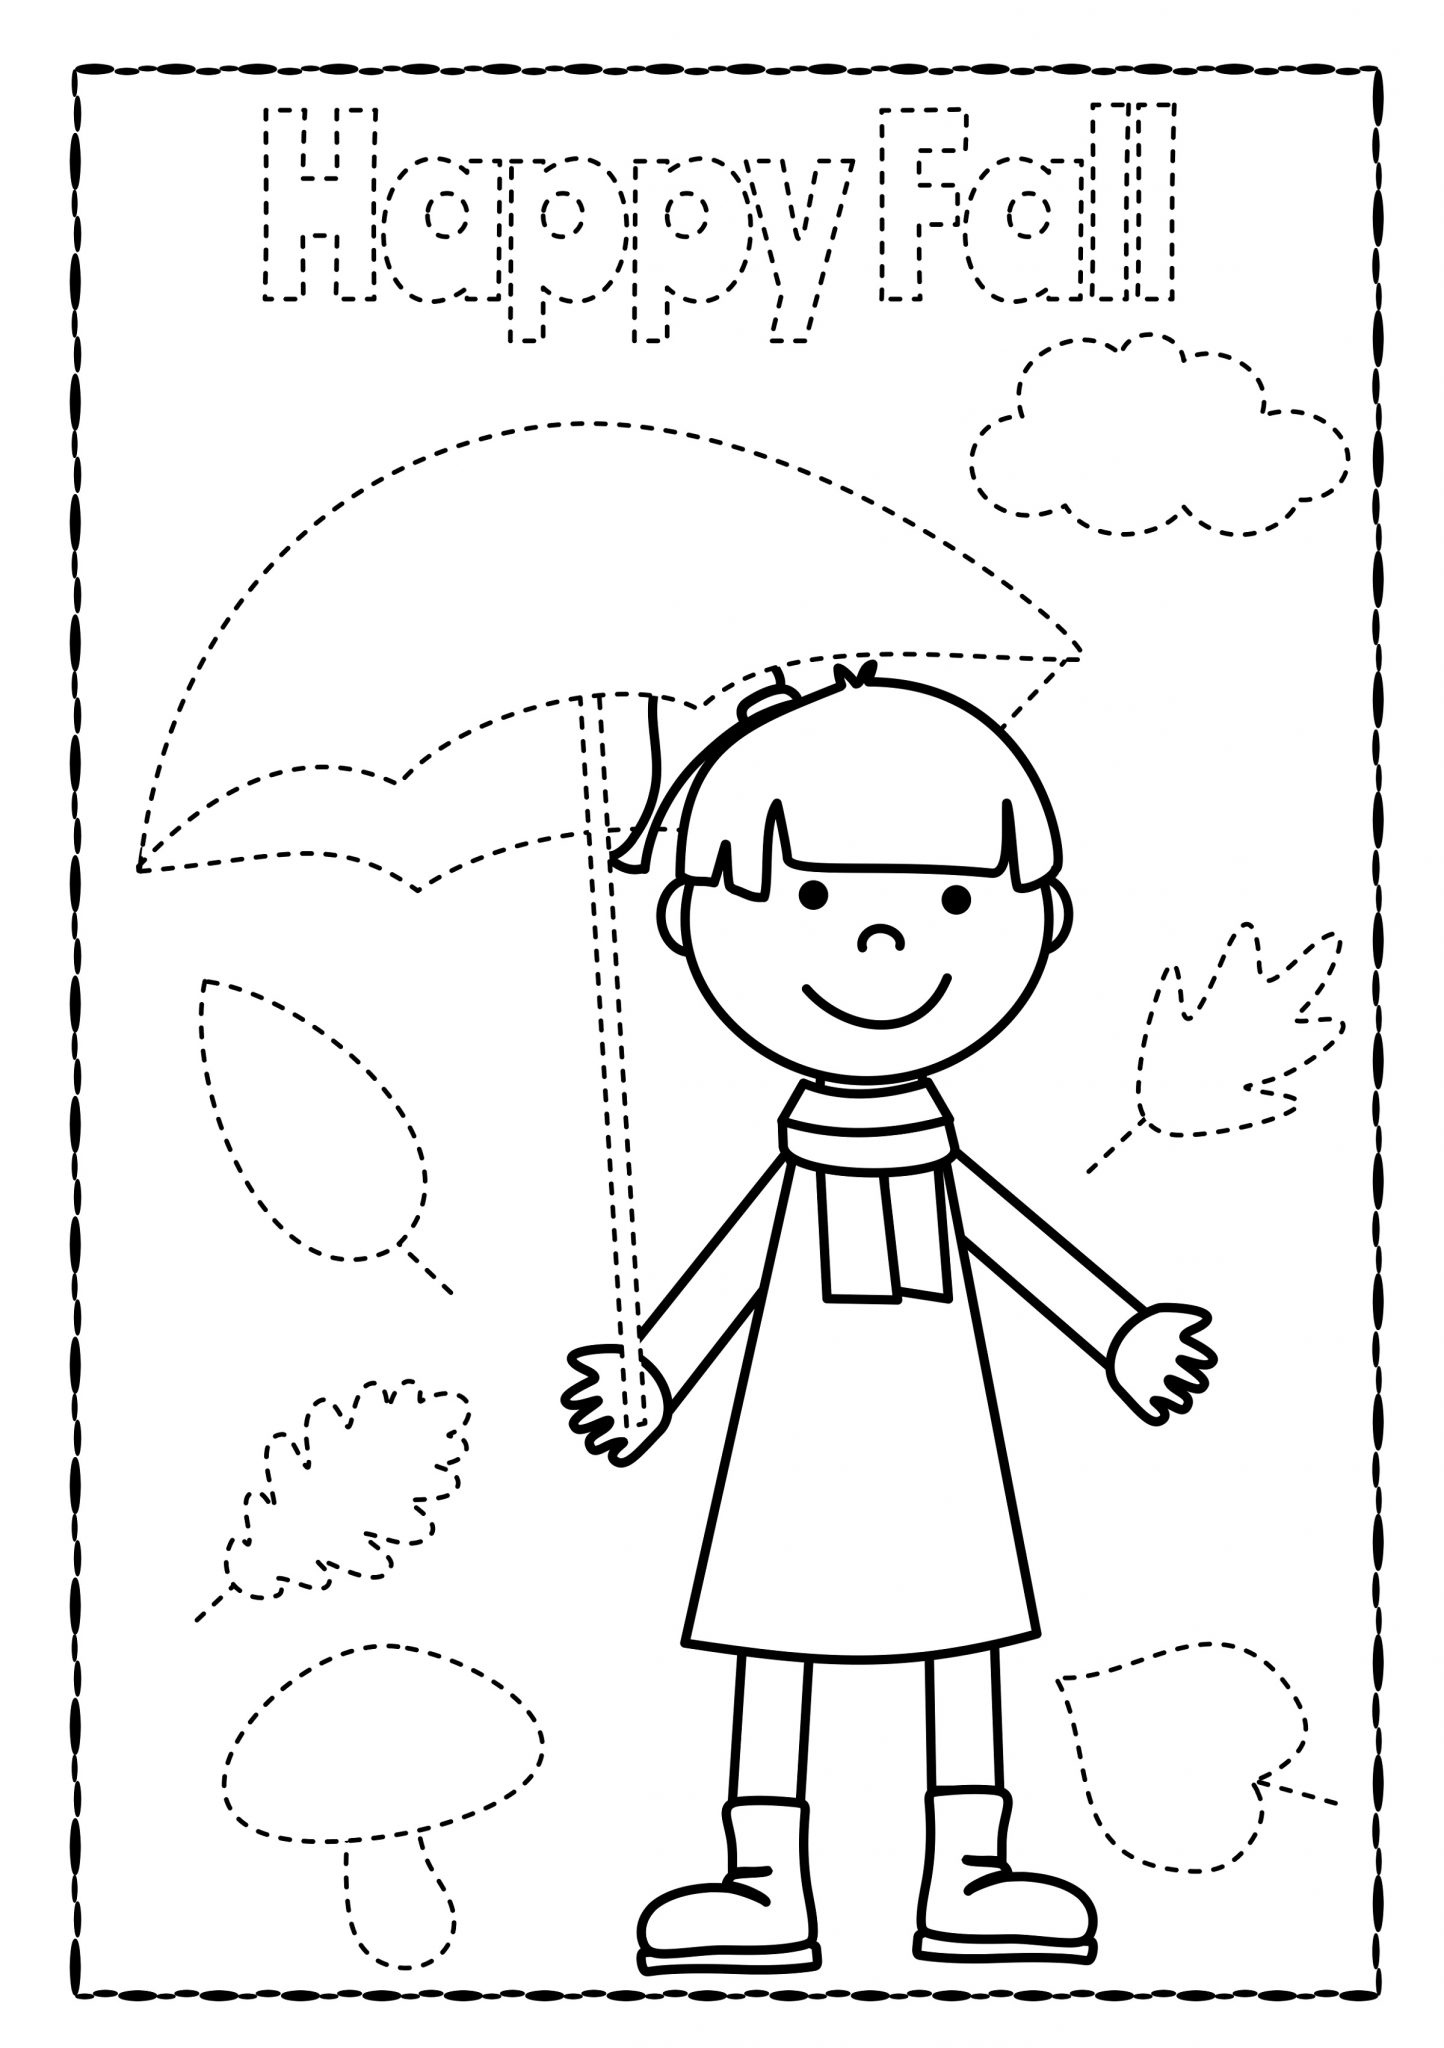 Free ABC Tracing Worksheets For Preschool ABC Tracing Worksheets